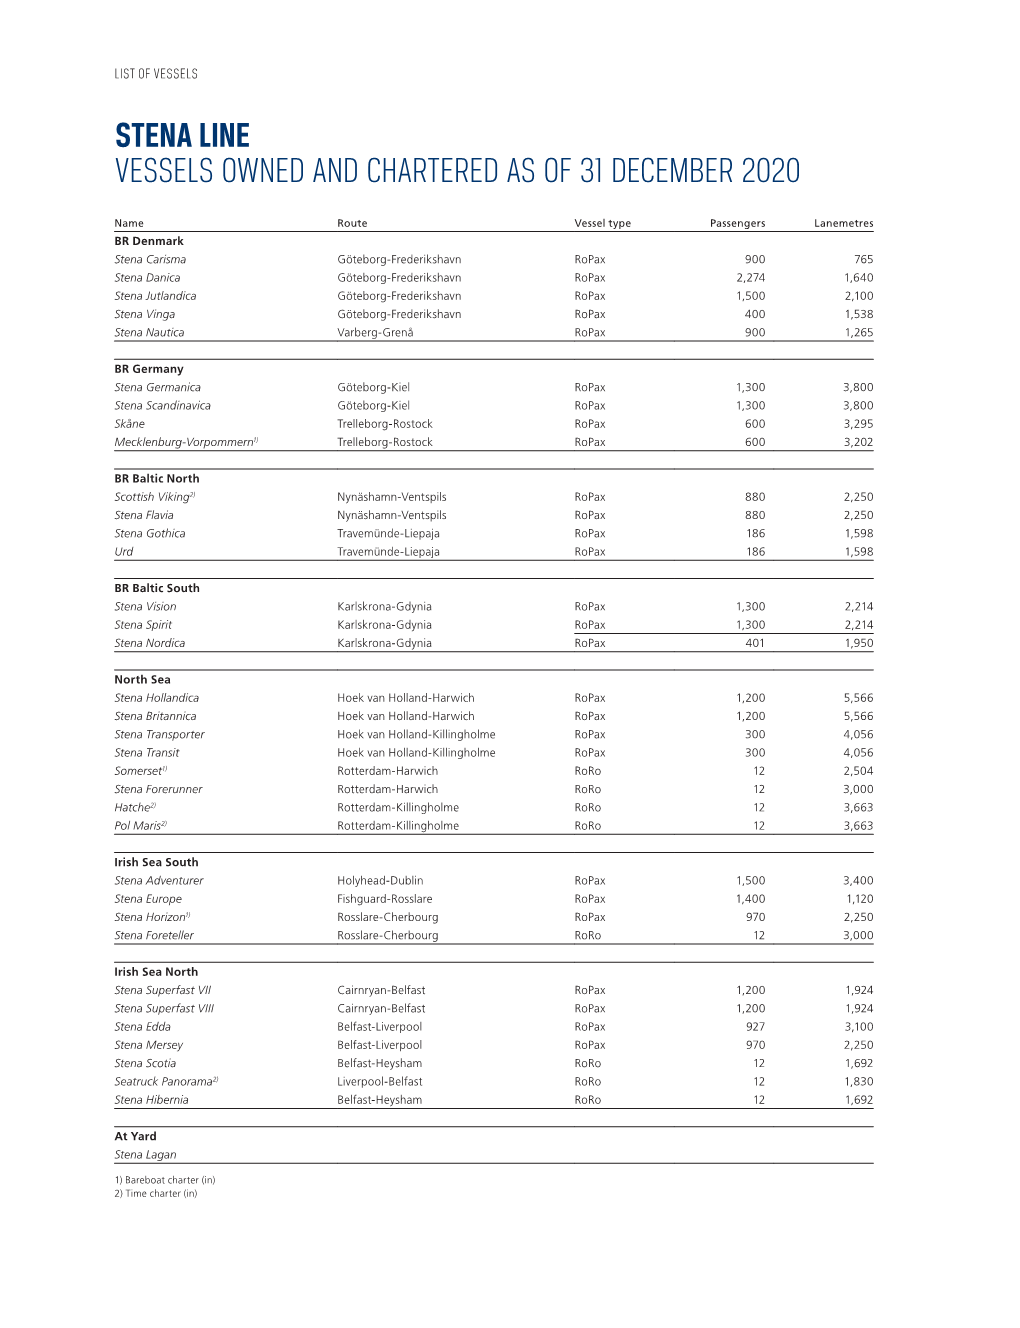 Stena Line Vessels Owned and Chartered As of 31 December 2020